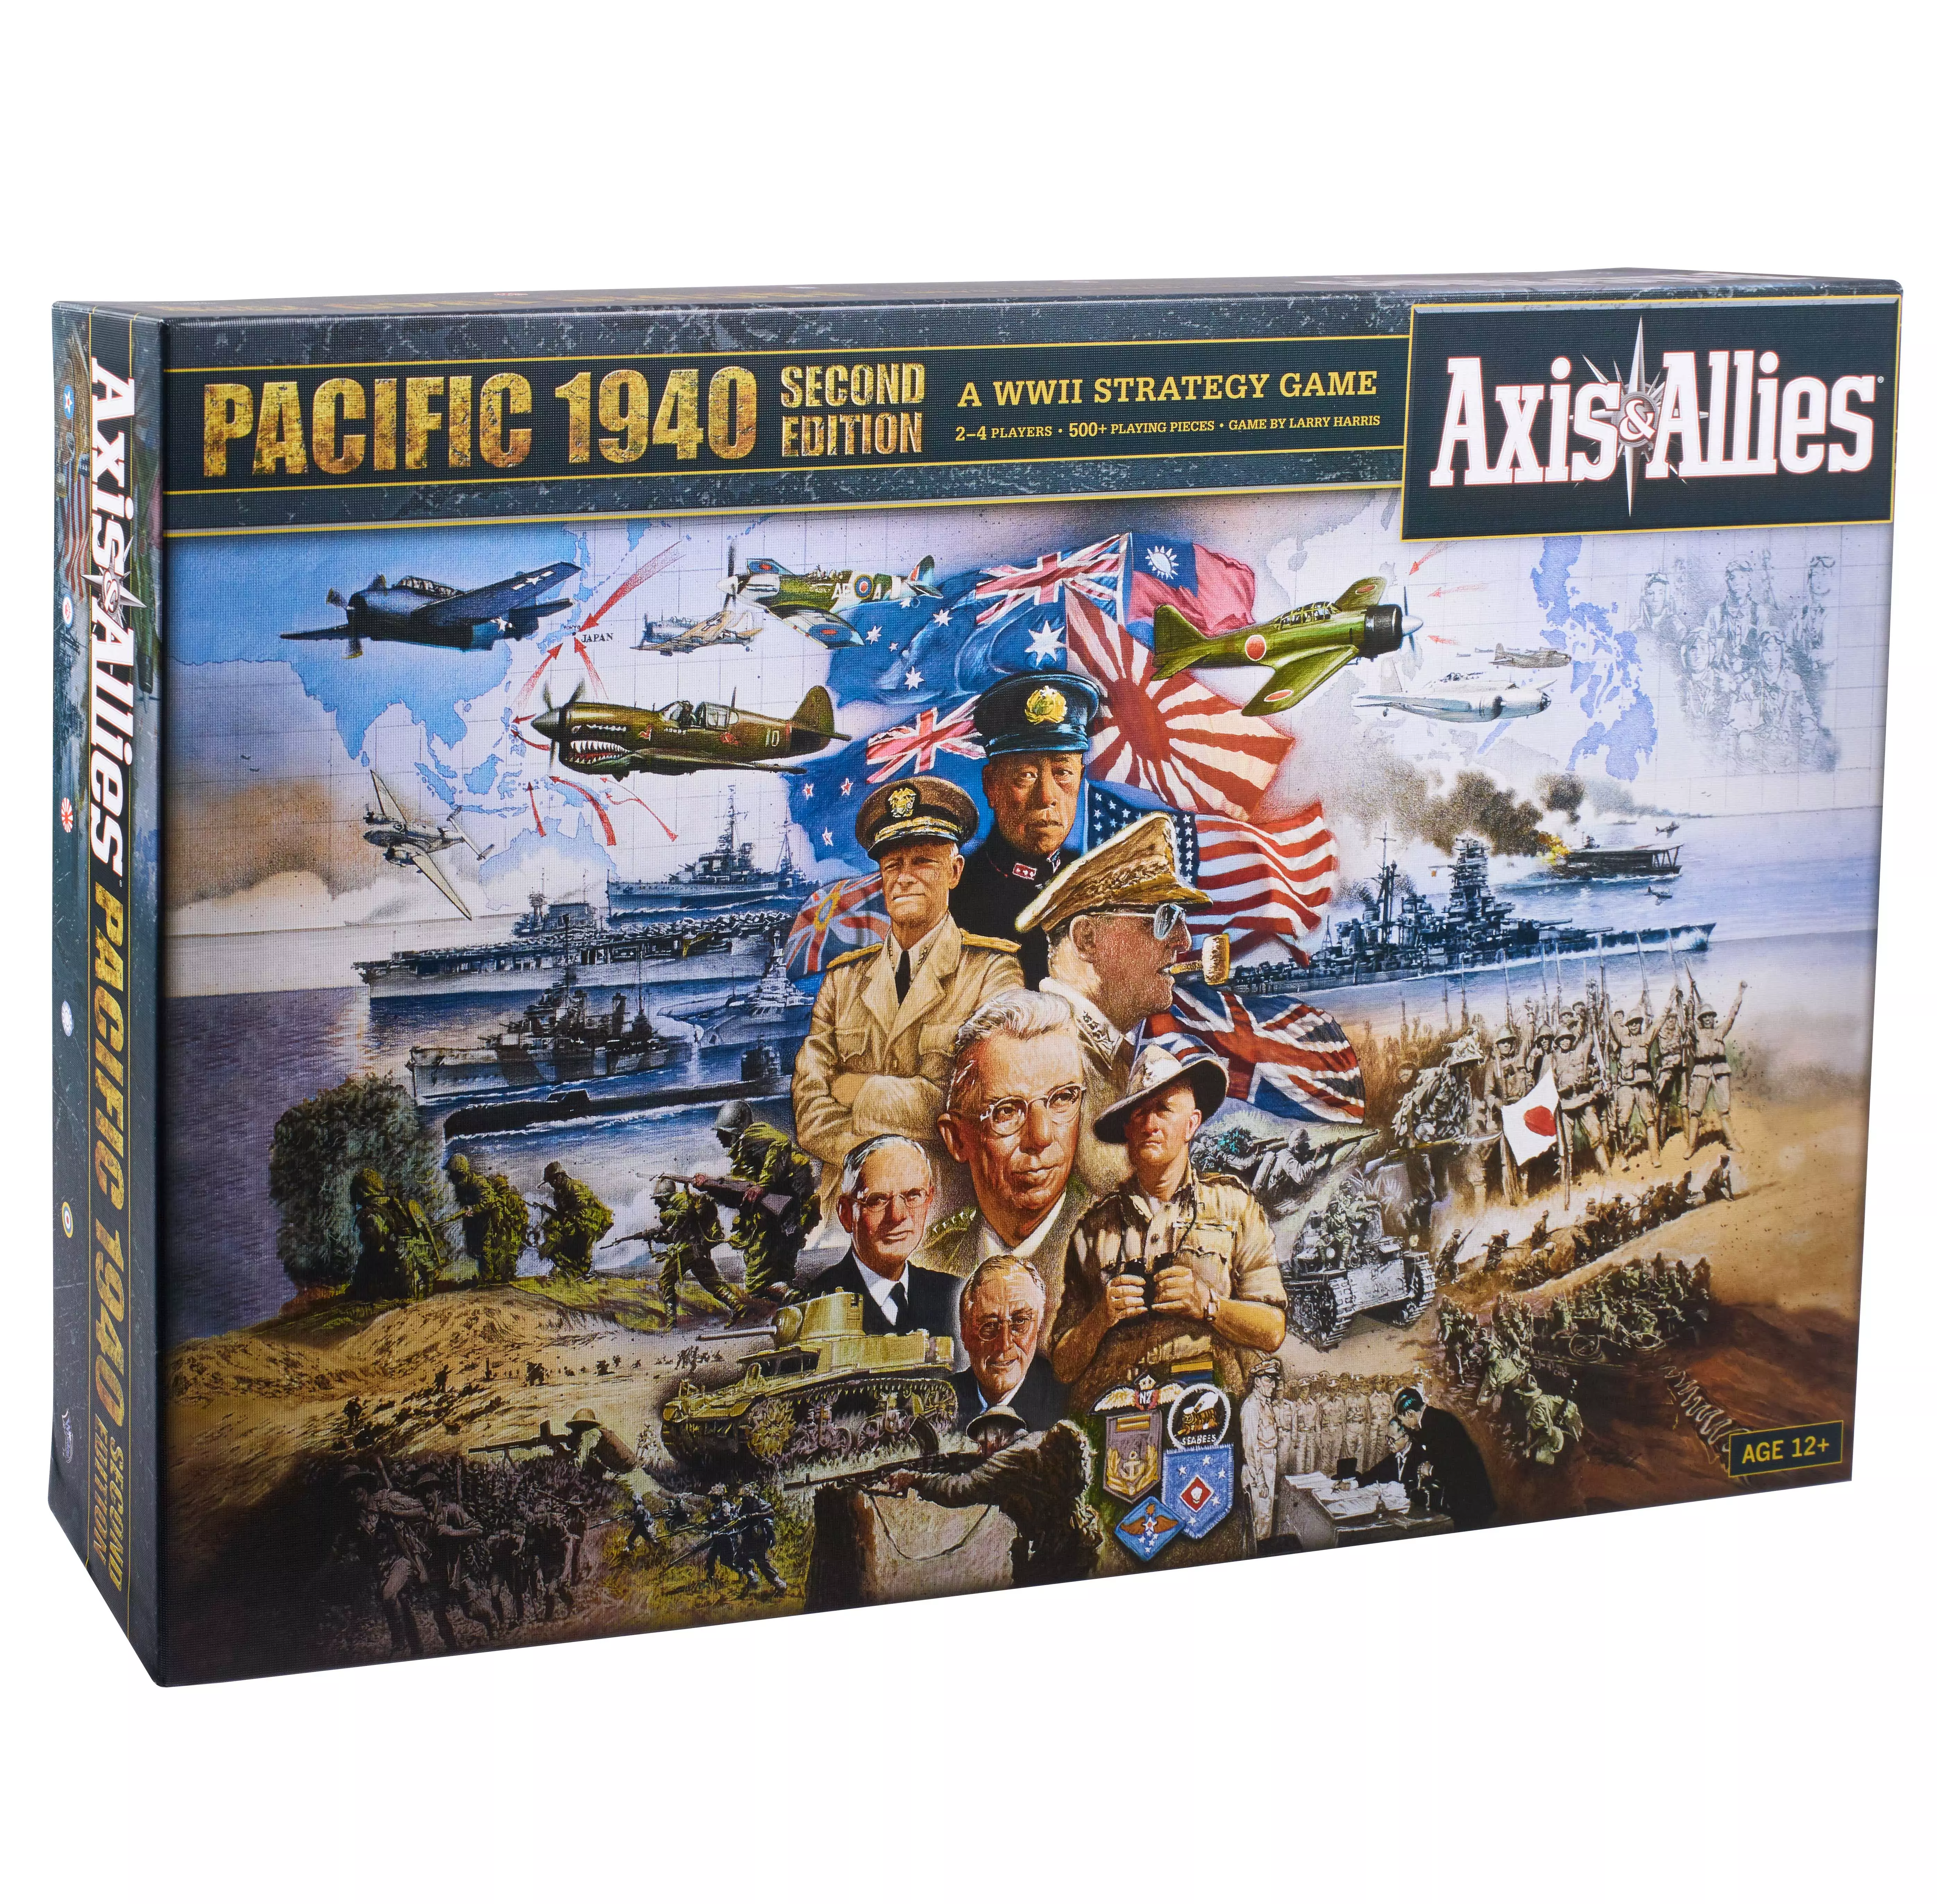 Axisallies 1940 Pacific 2Nd Edition Rgd02555